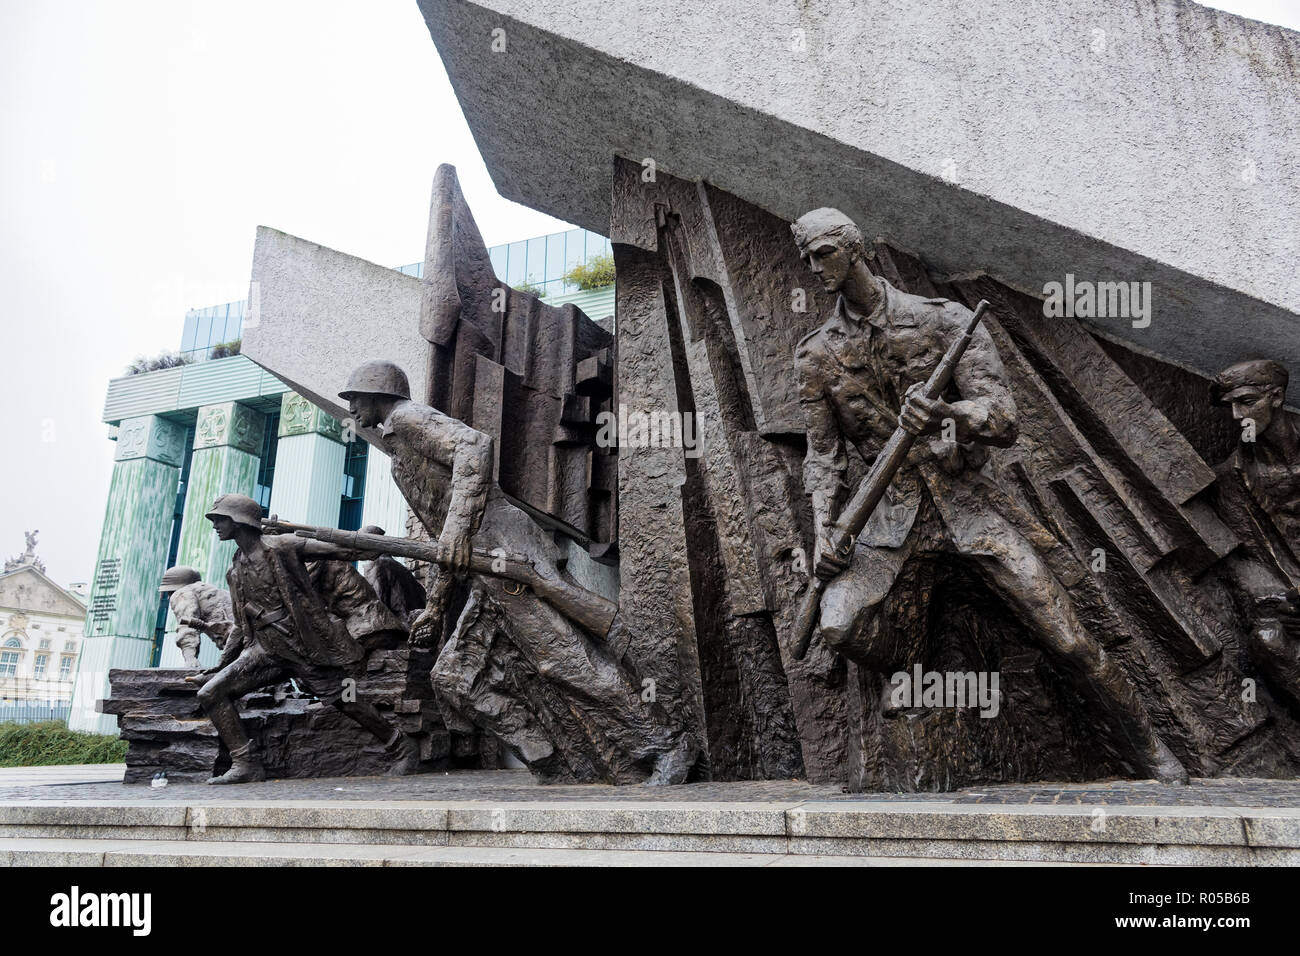 Part of the Warsaw Uprising Monument, a memorial dedicated to the Warsaw Uprising of 1944, on October 22, 2017 in Warsaw, Poland Stock Photo